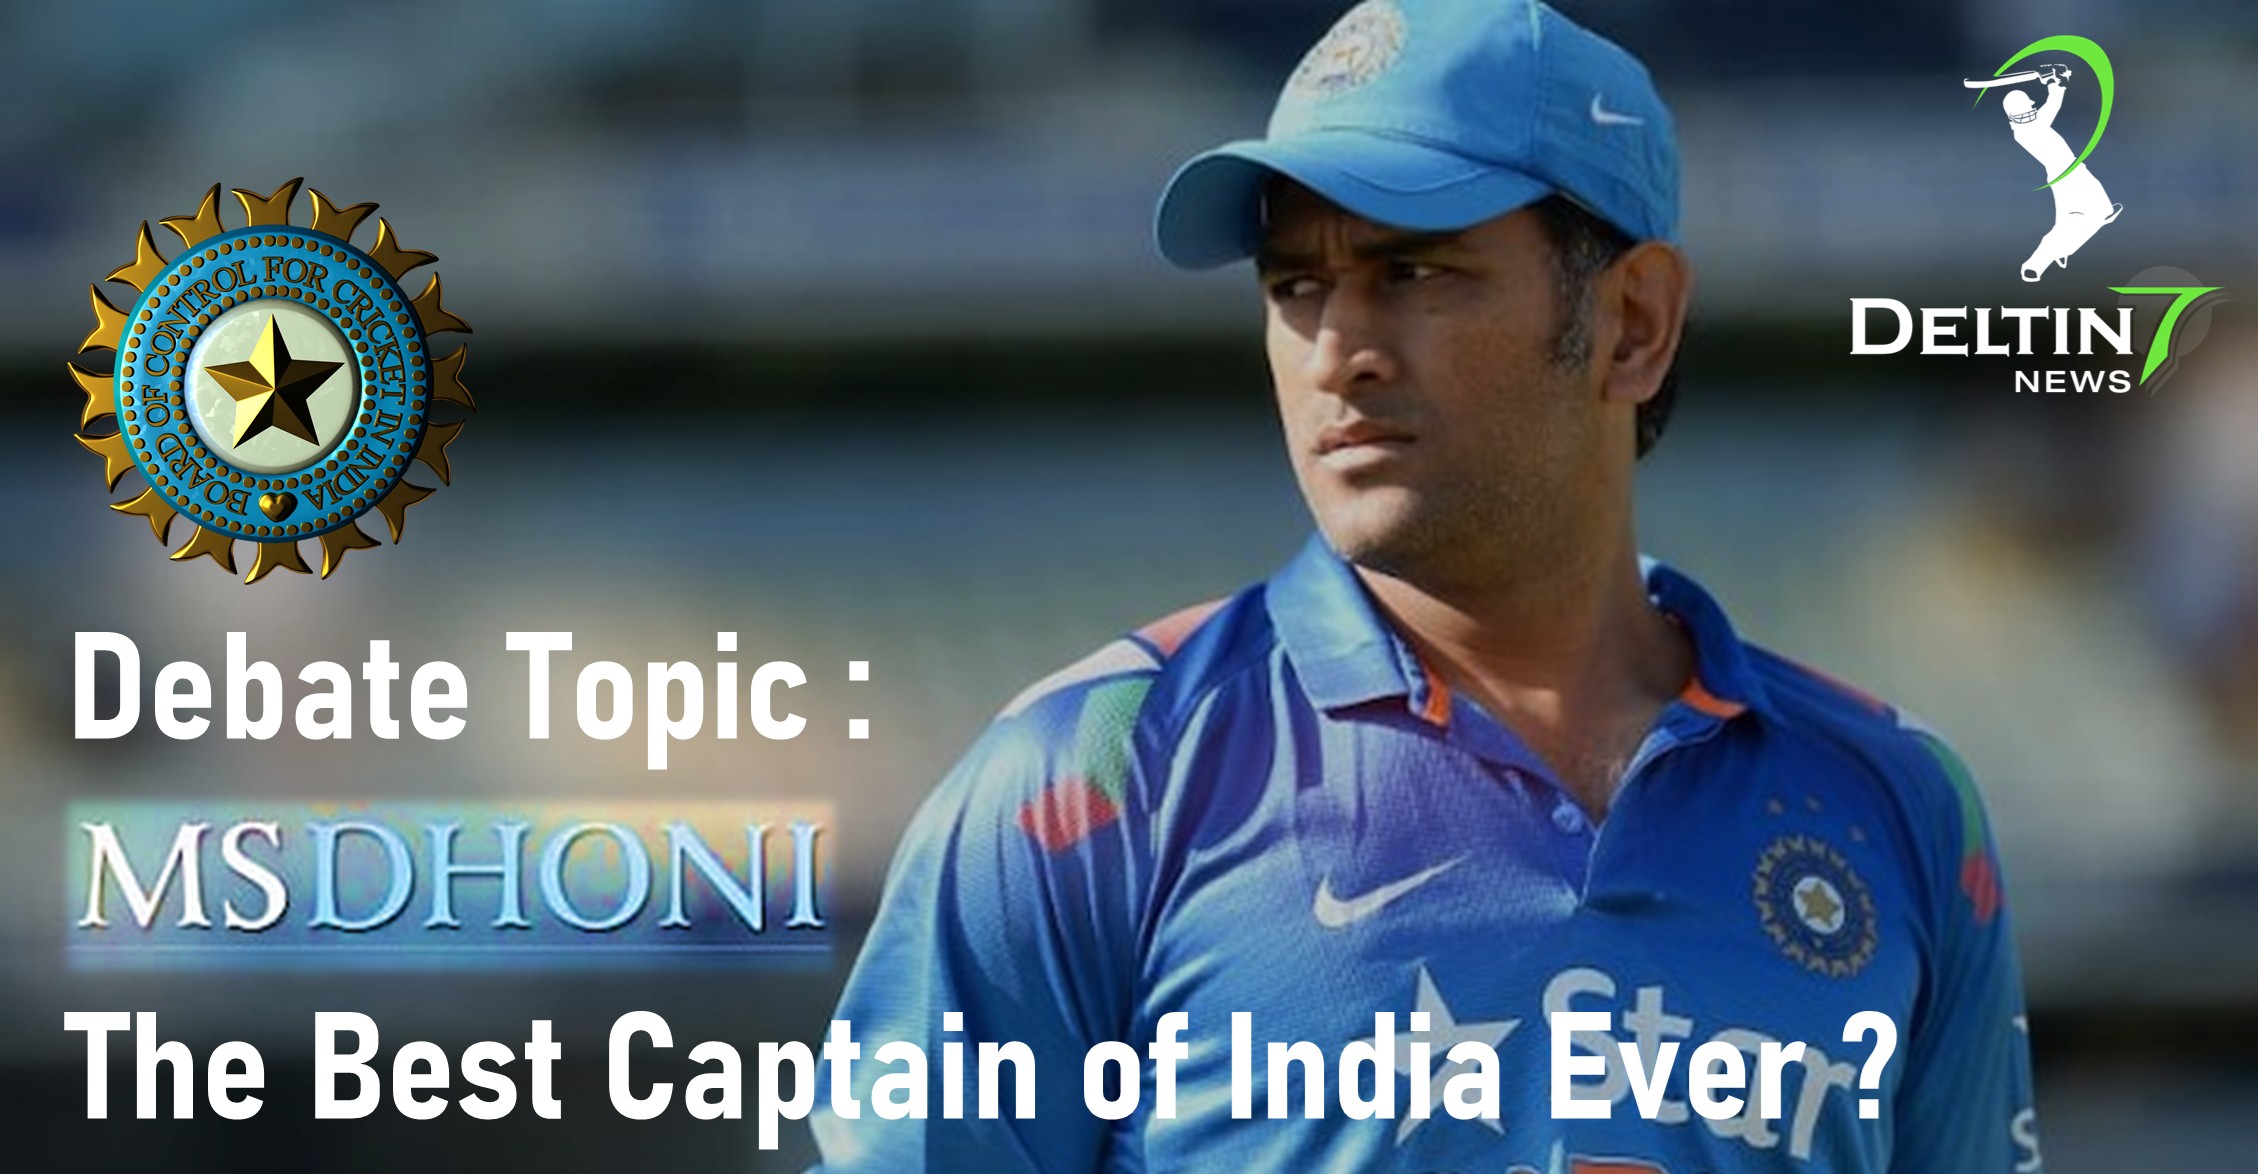 Debate Topic: If Ms Dhoni is Best Captain of India Ever?